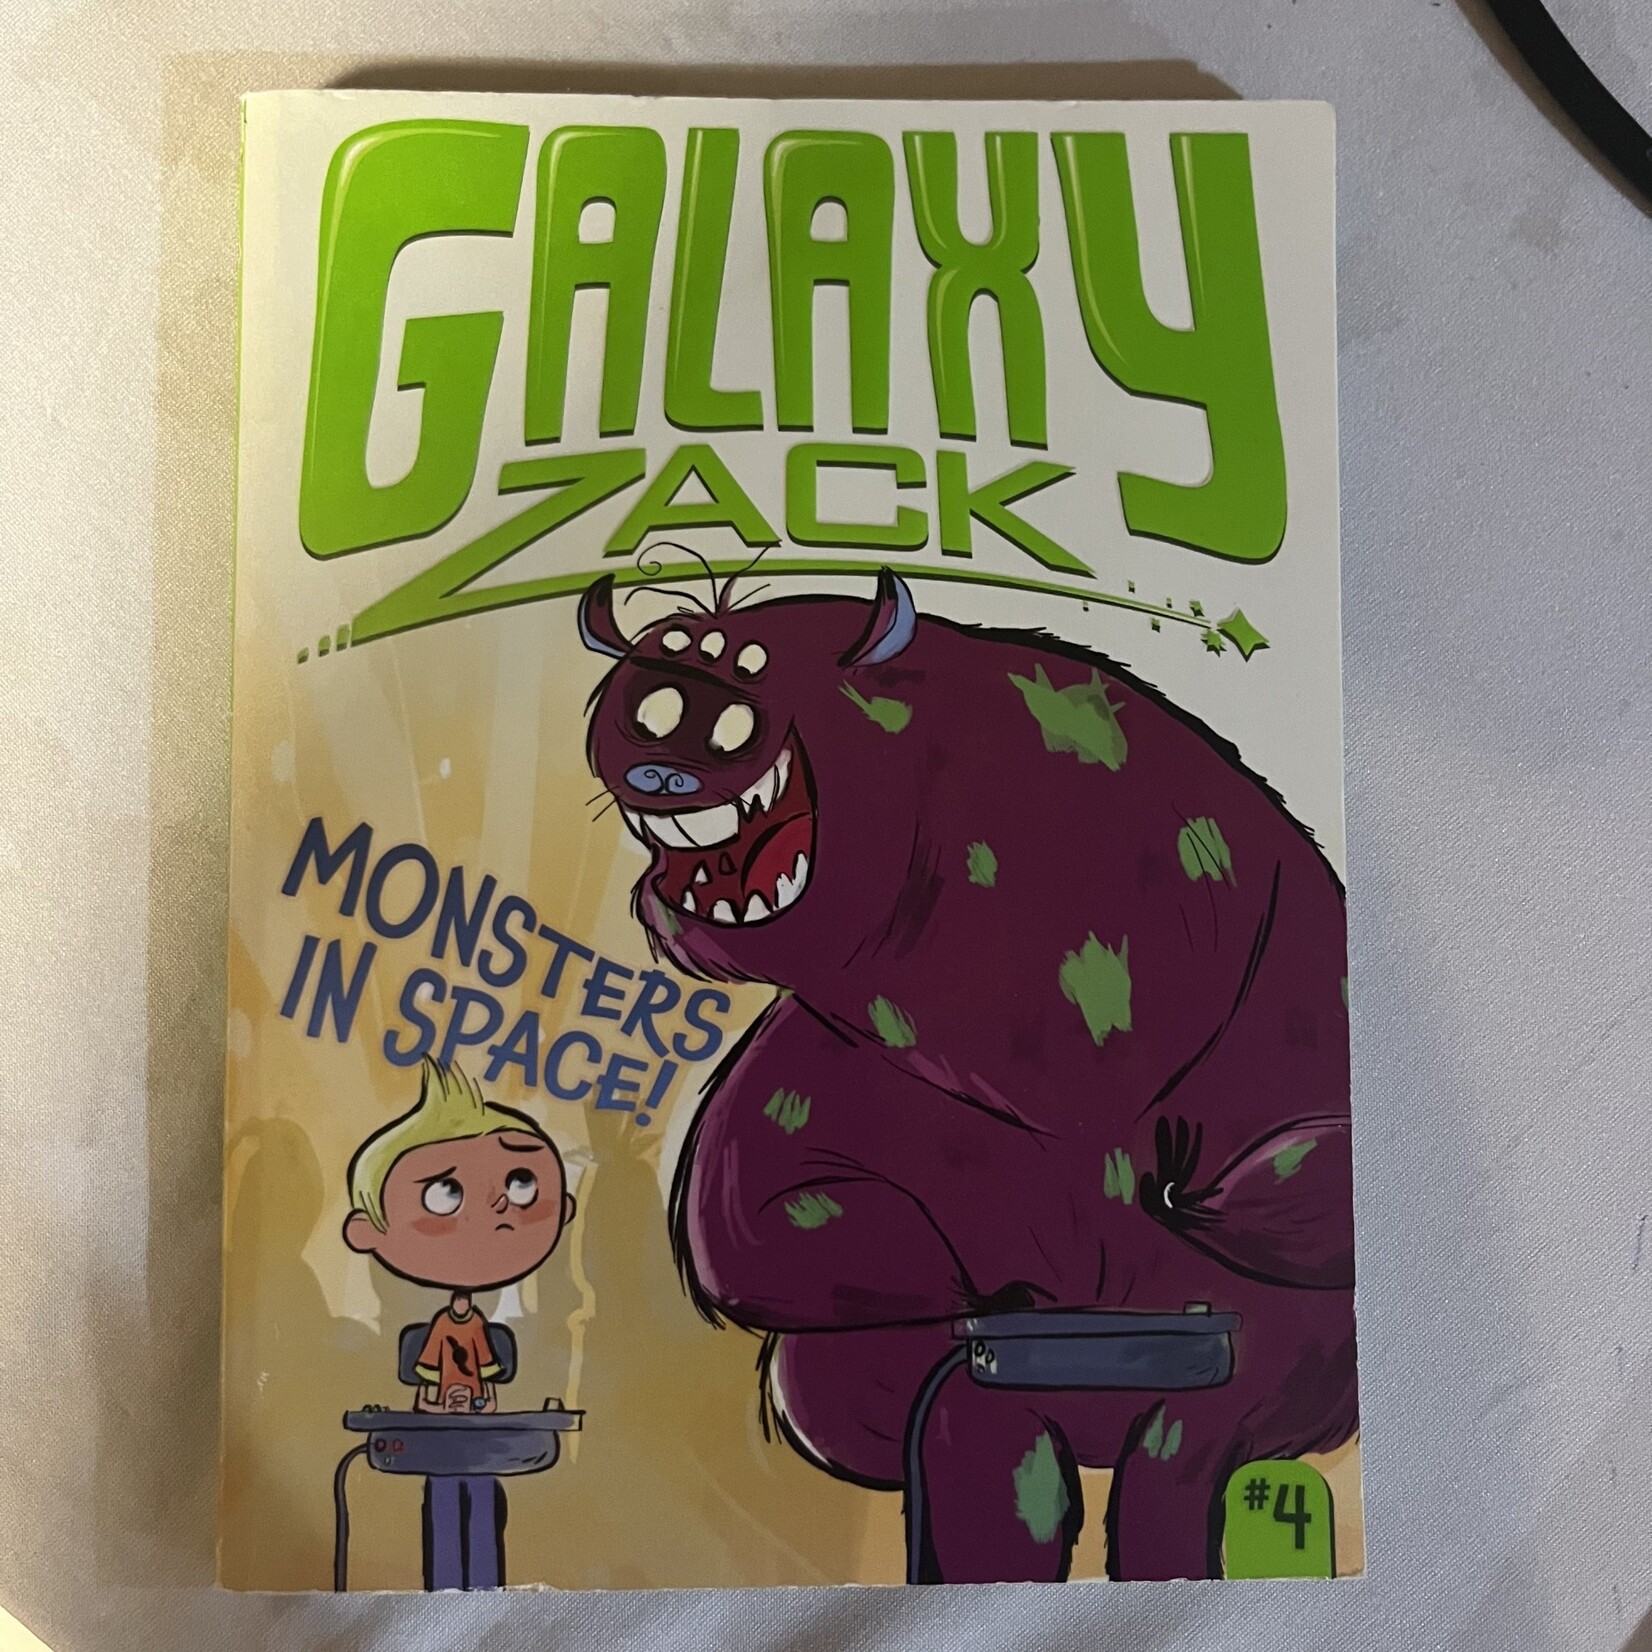 Galaxy Zack - Monsters in Space!